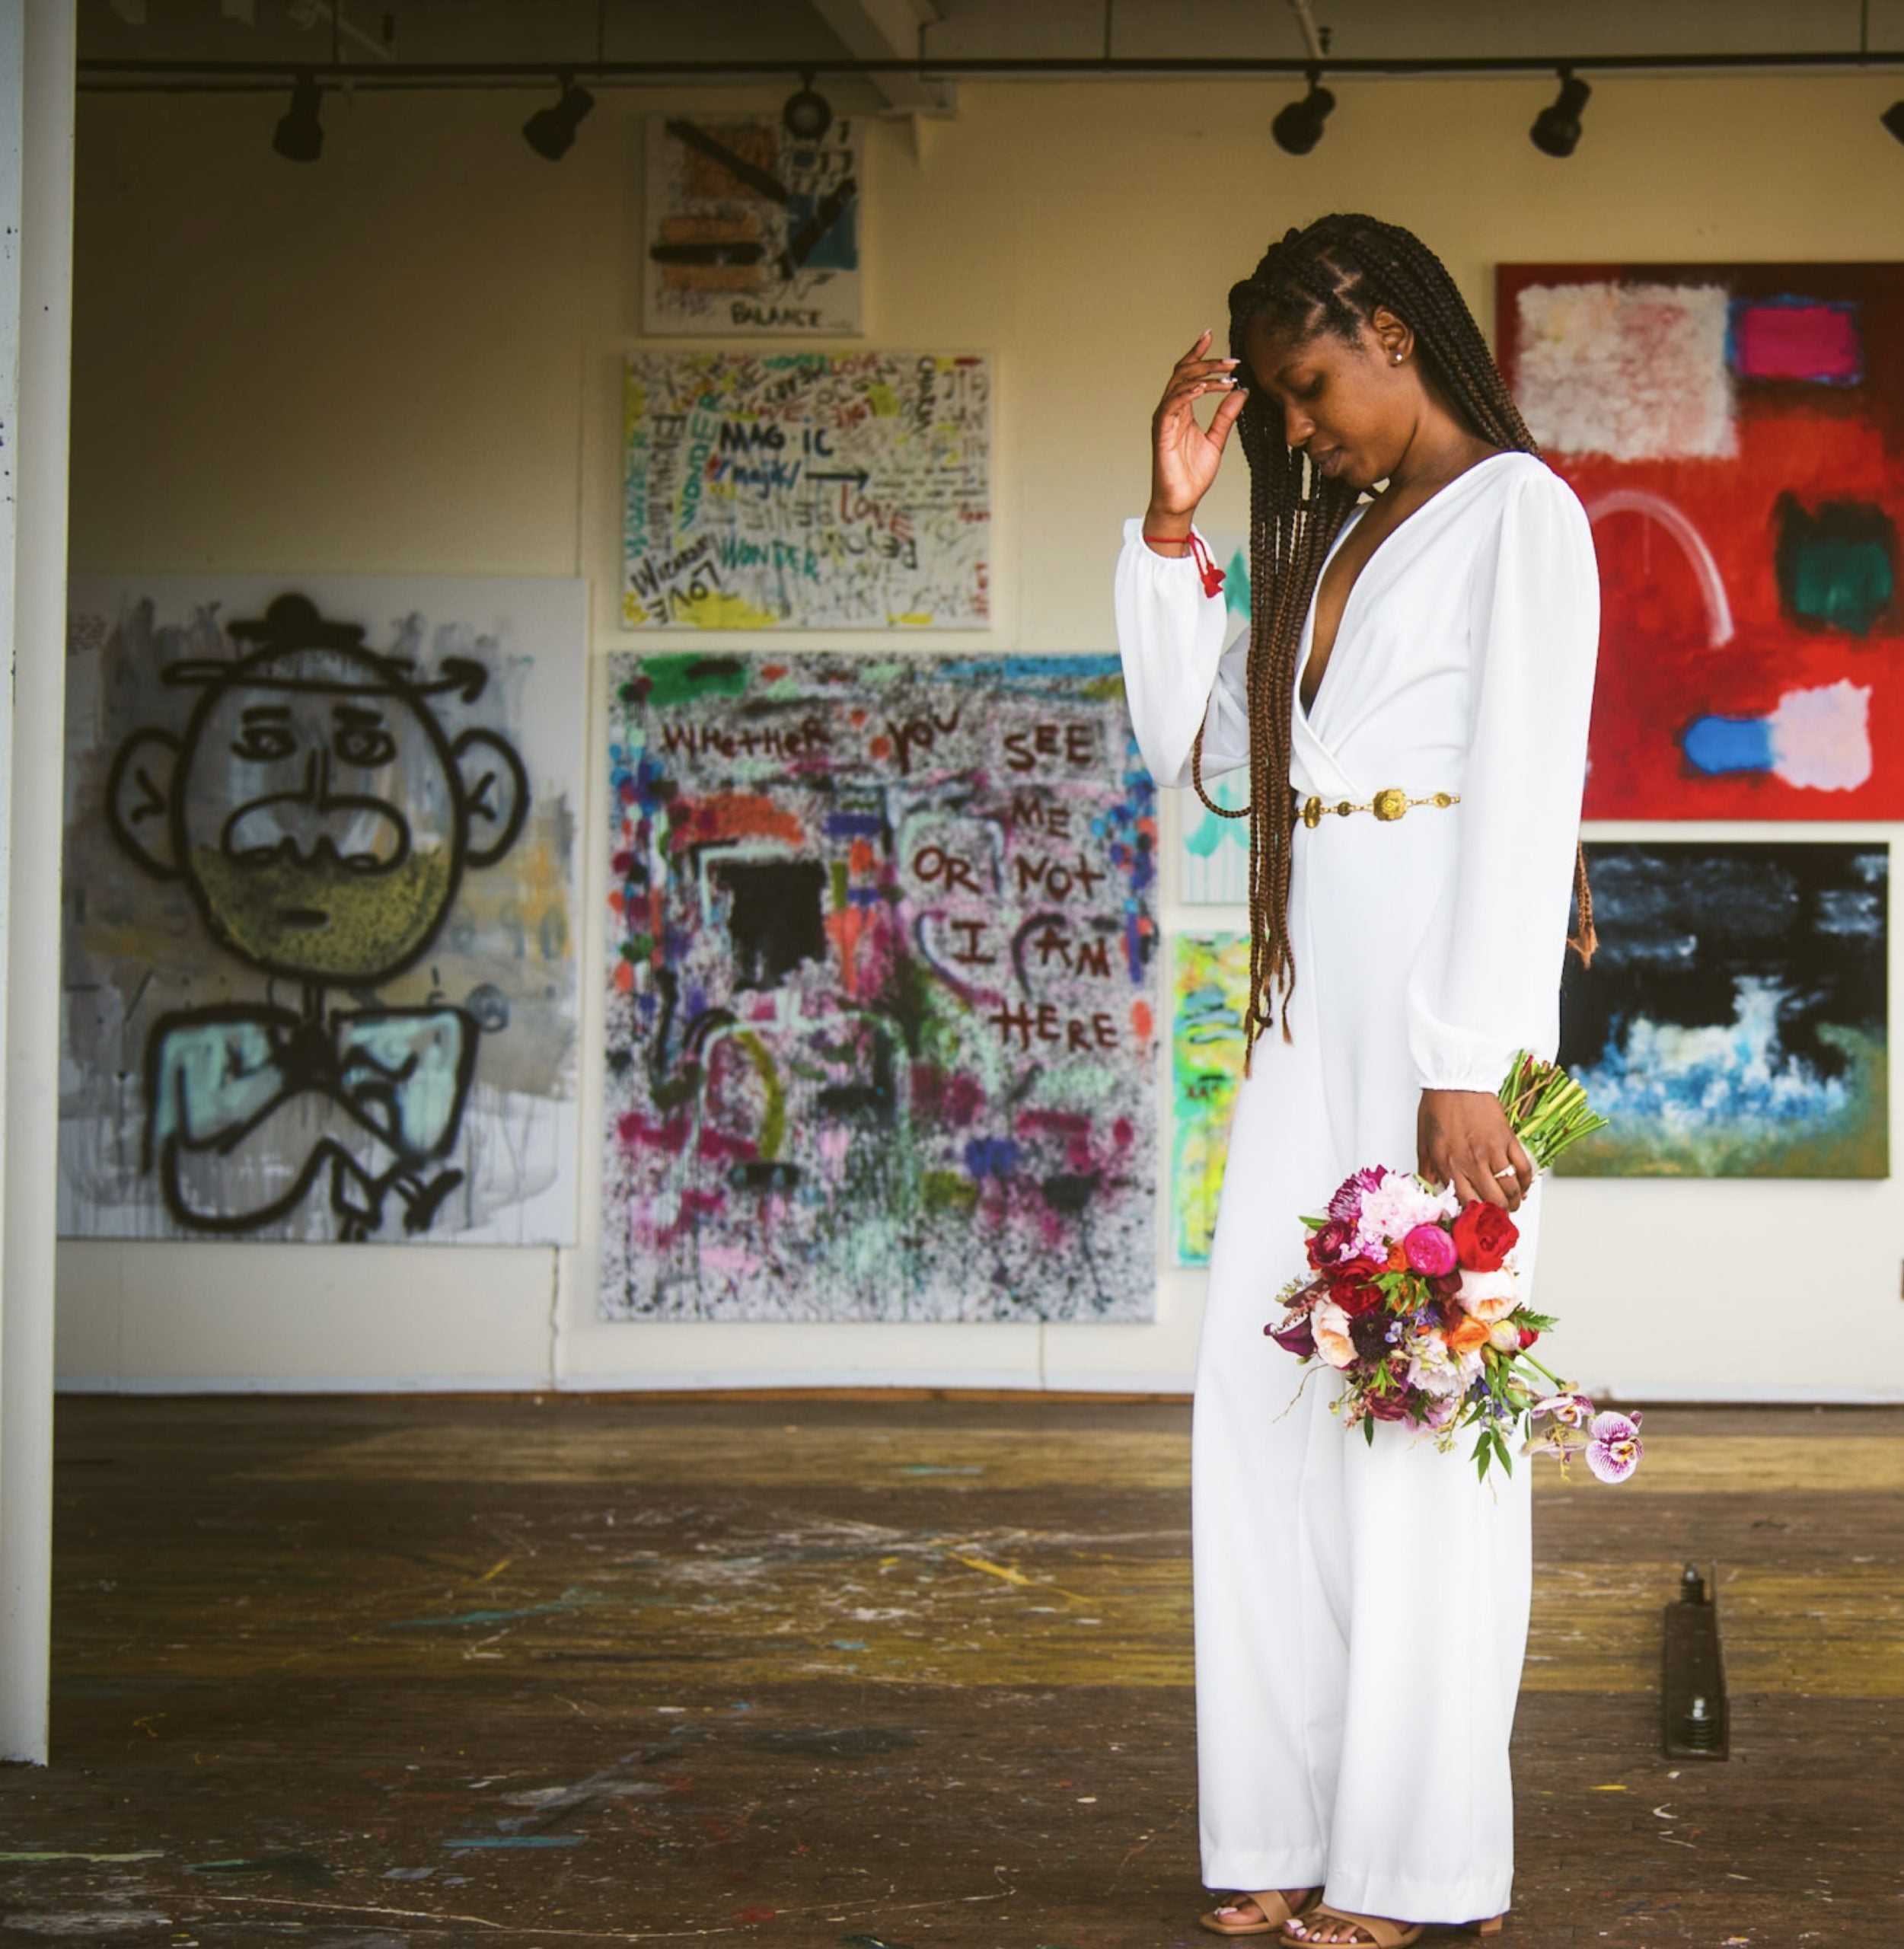 Eye Of The Beholder: This Art Curator Has Built A Career Through Recognizing Black Expression